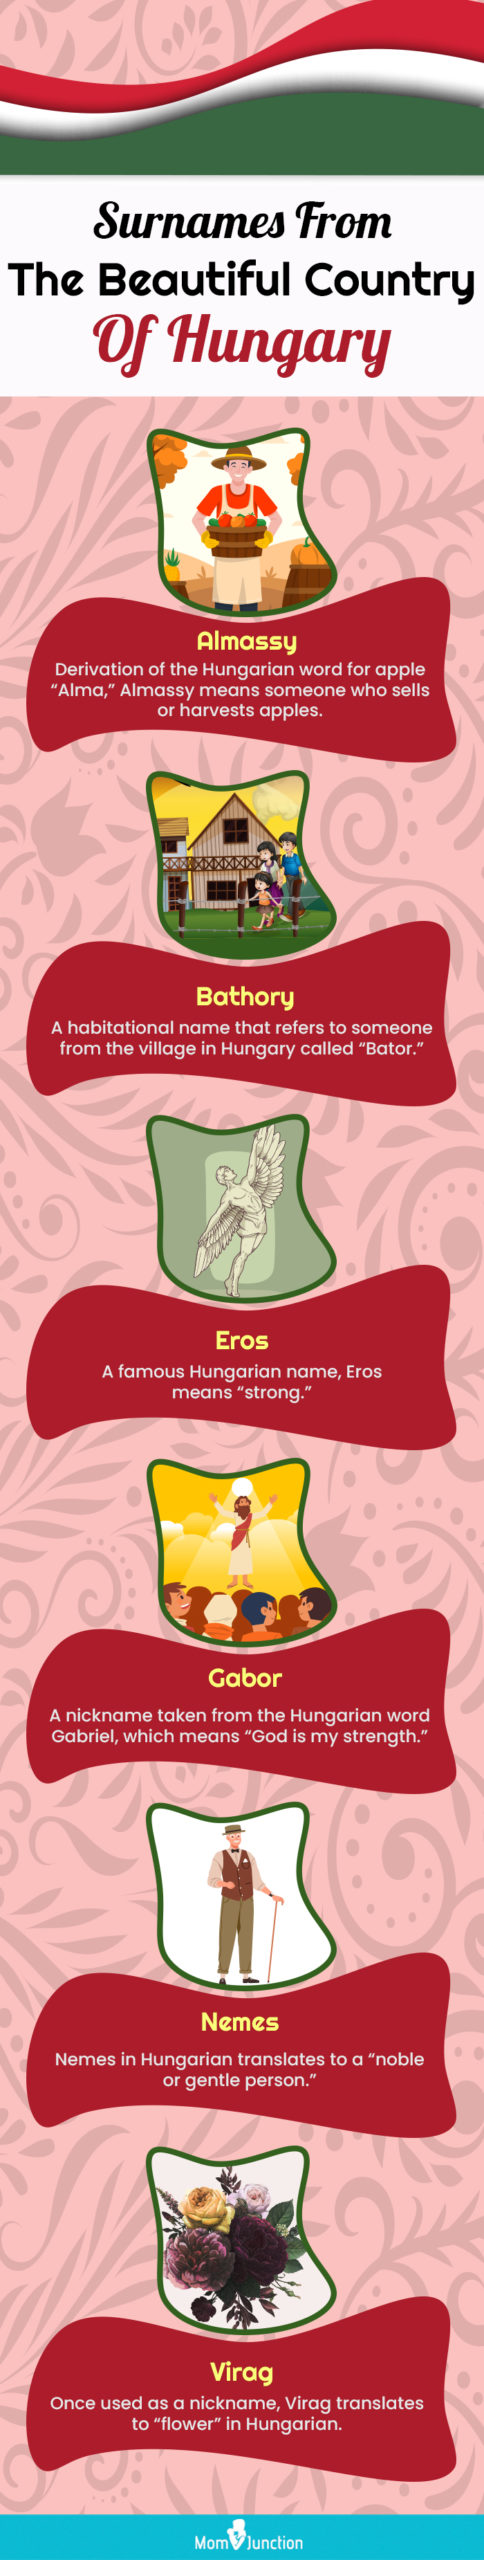 surnames from the beautiful country of hungary [infographic]